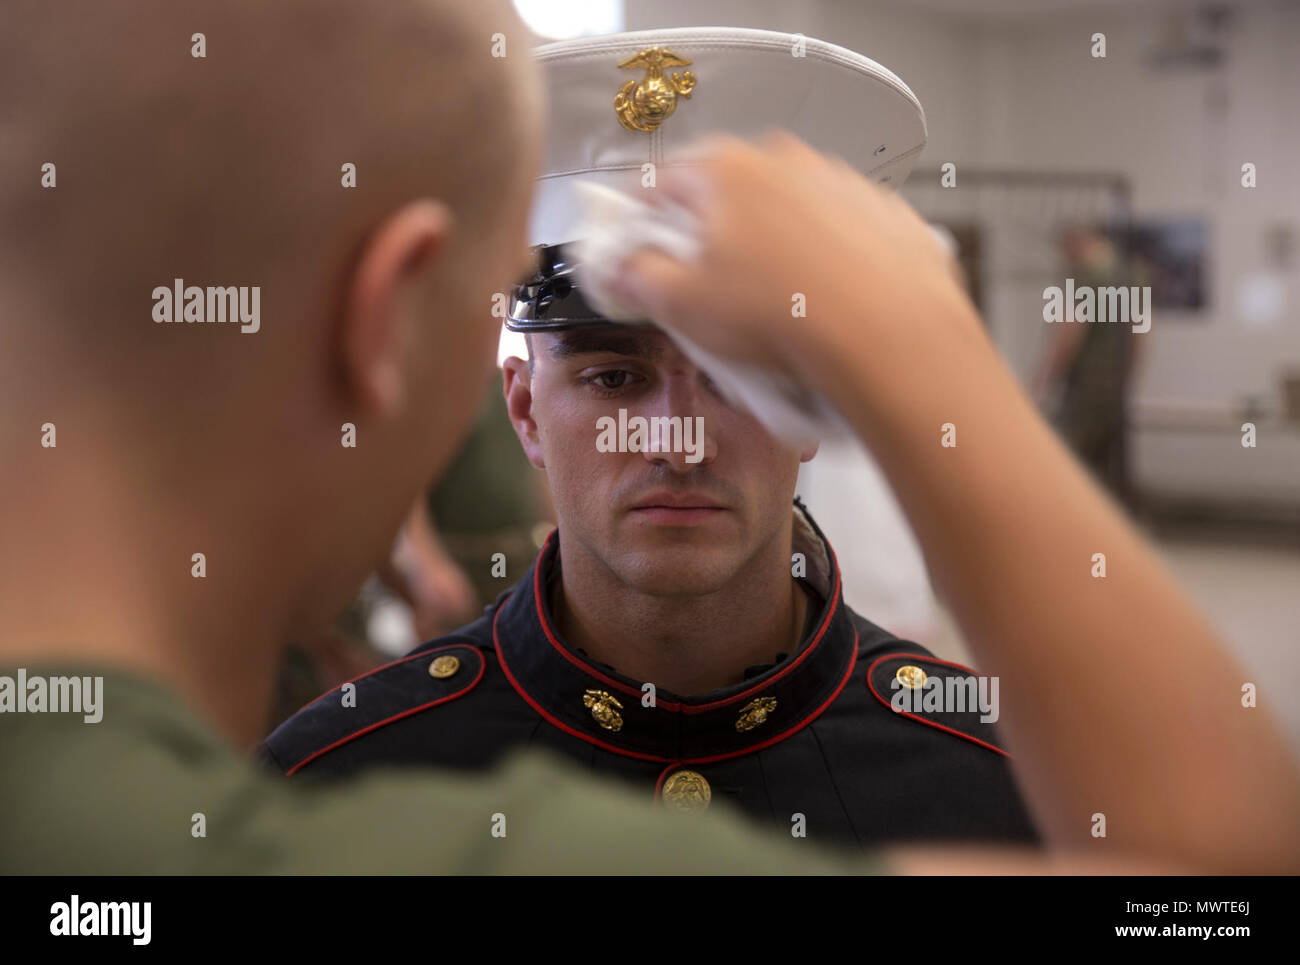 Rct. Jack T. Fischer, Platoon 3044, Lima Company, 3rd Recruit Training Battalion, stands at attention while his cover is cleaned April 27, 2017, on Parris Island, S.C. Recruits take time to ensure their grooming and uniforms meet Marine Corps standards before taking their first official Marine Corps photograph. Fischer, 21, from Miller Place, N.Y., is scheduled to graduate June 16, 2017. Parris Island has been the site of Marine Corps recruit training since Nov. 1, 1915. Today, approximately 19,000 recruits come to Parris Island annually for the chance to become United States Marines by enduri Stock Photo